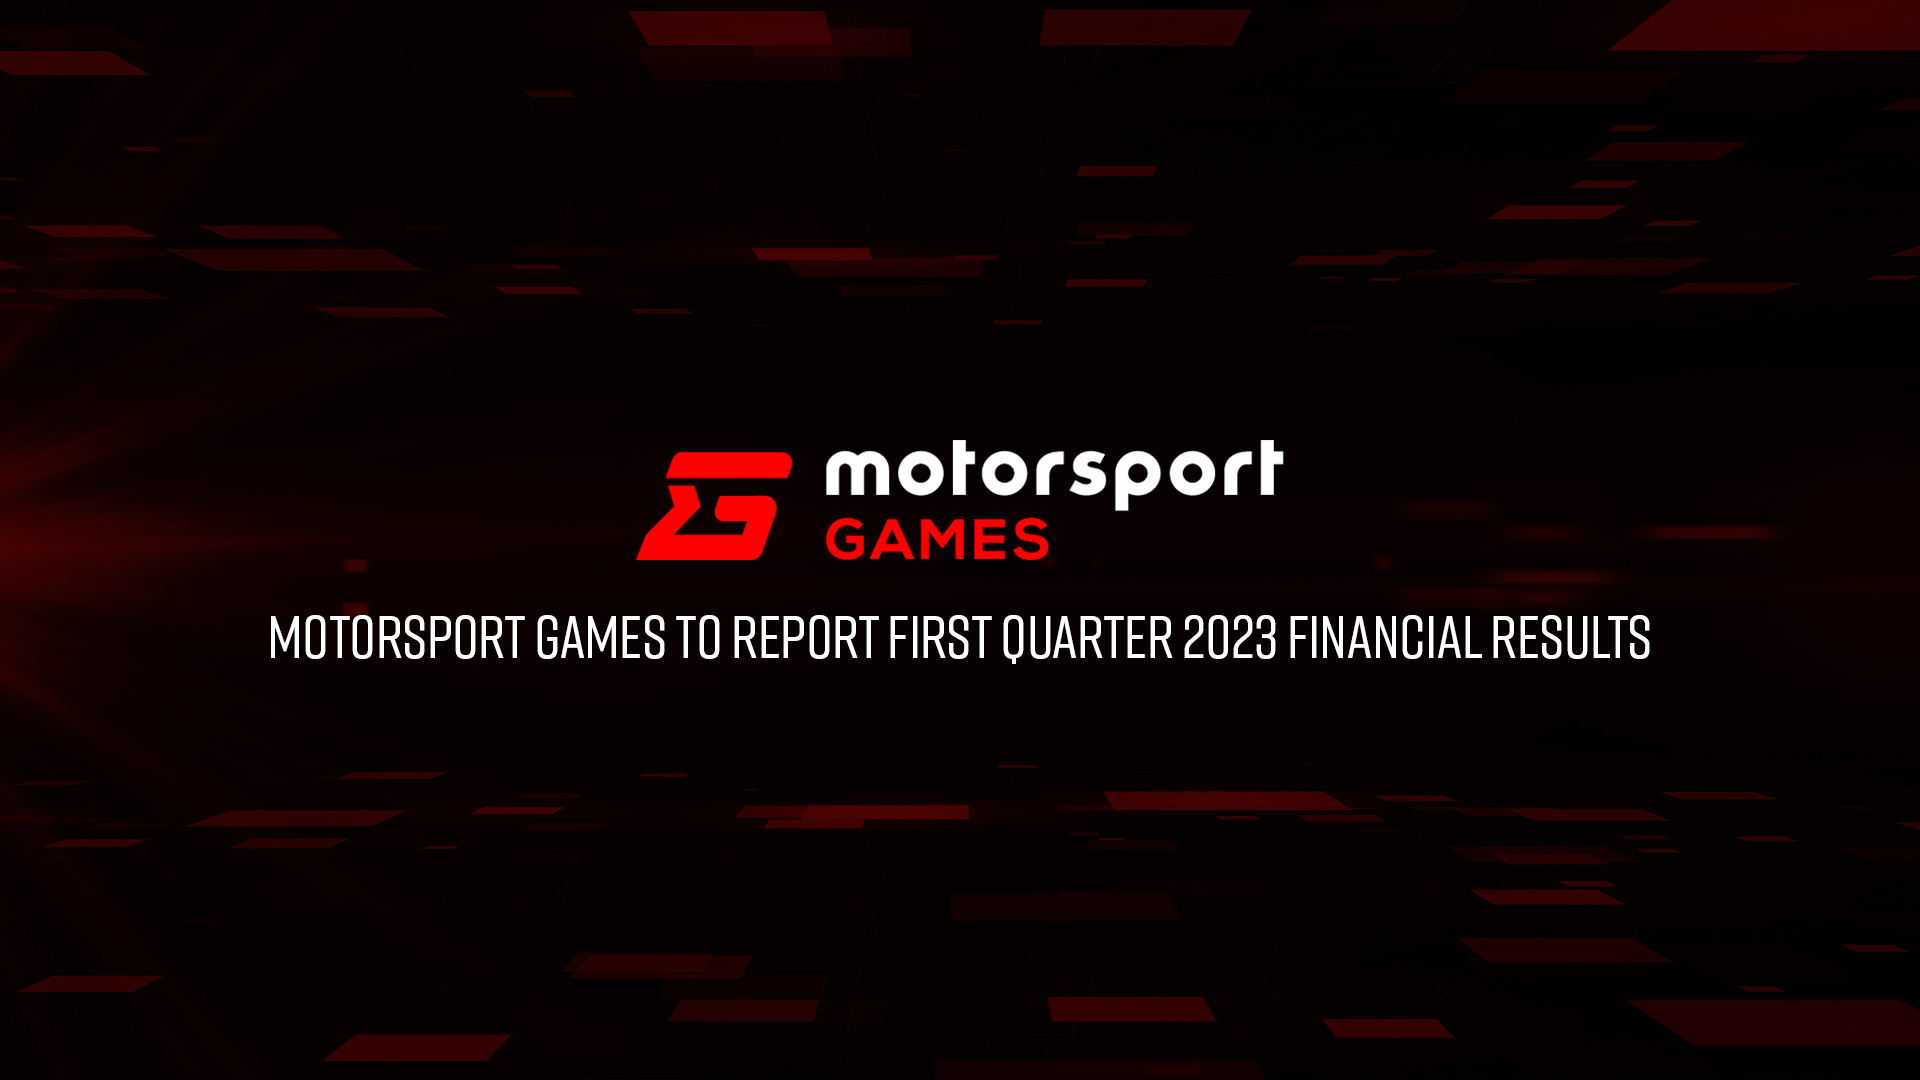 Motorsport Games to Report Q1 2023 Financial Results